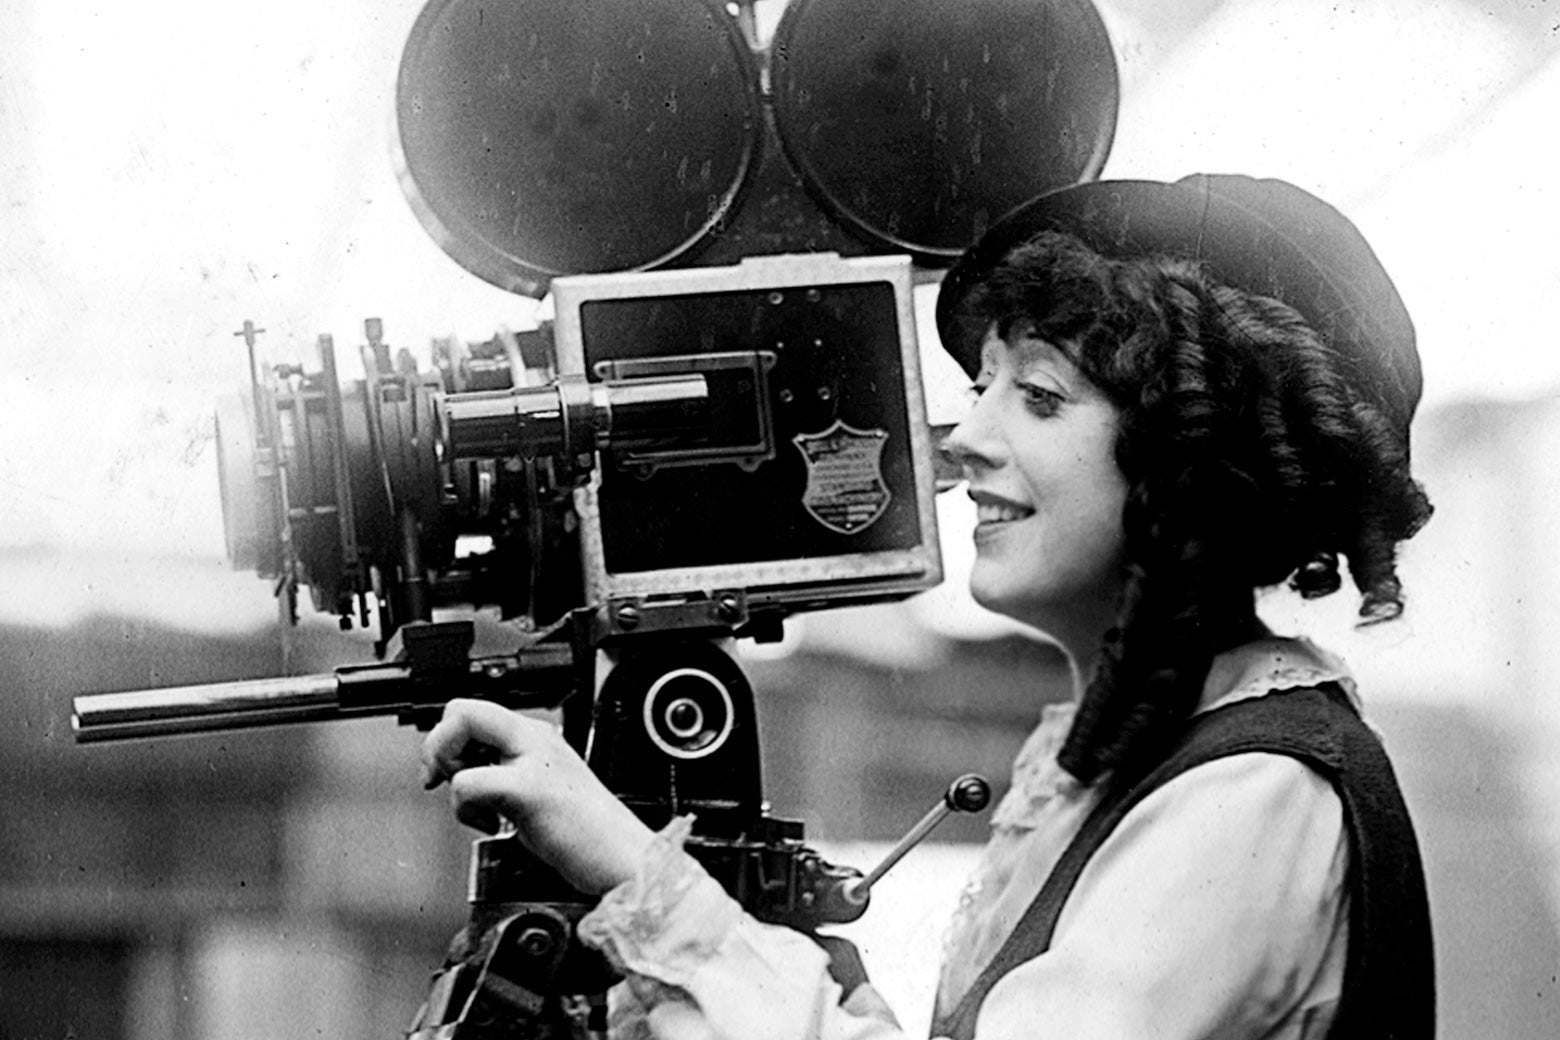 Charlie Chaplin, Buster Keaton, and Mabel Normand why silent movies had more female directors. pic